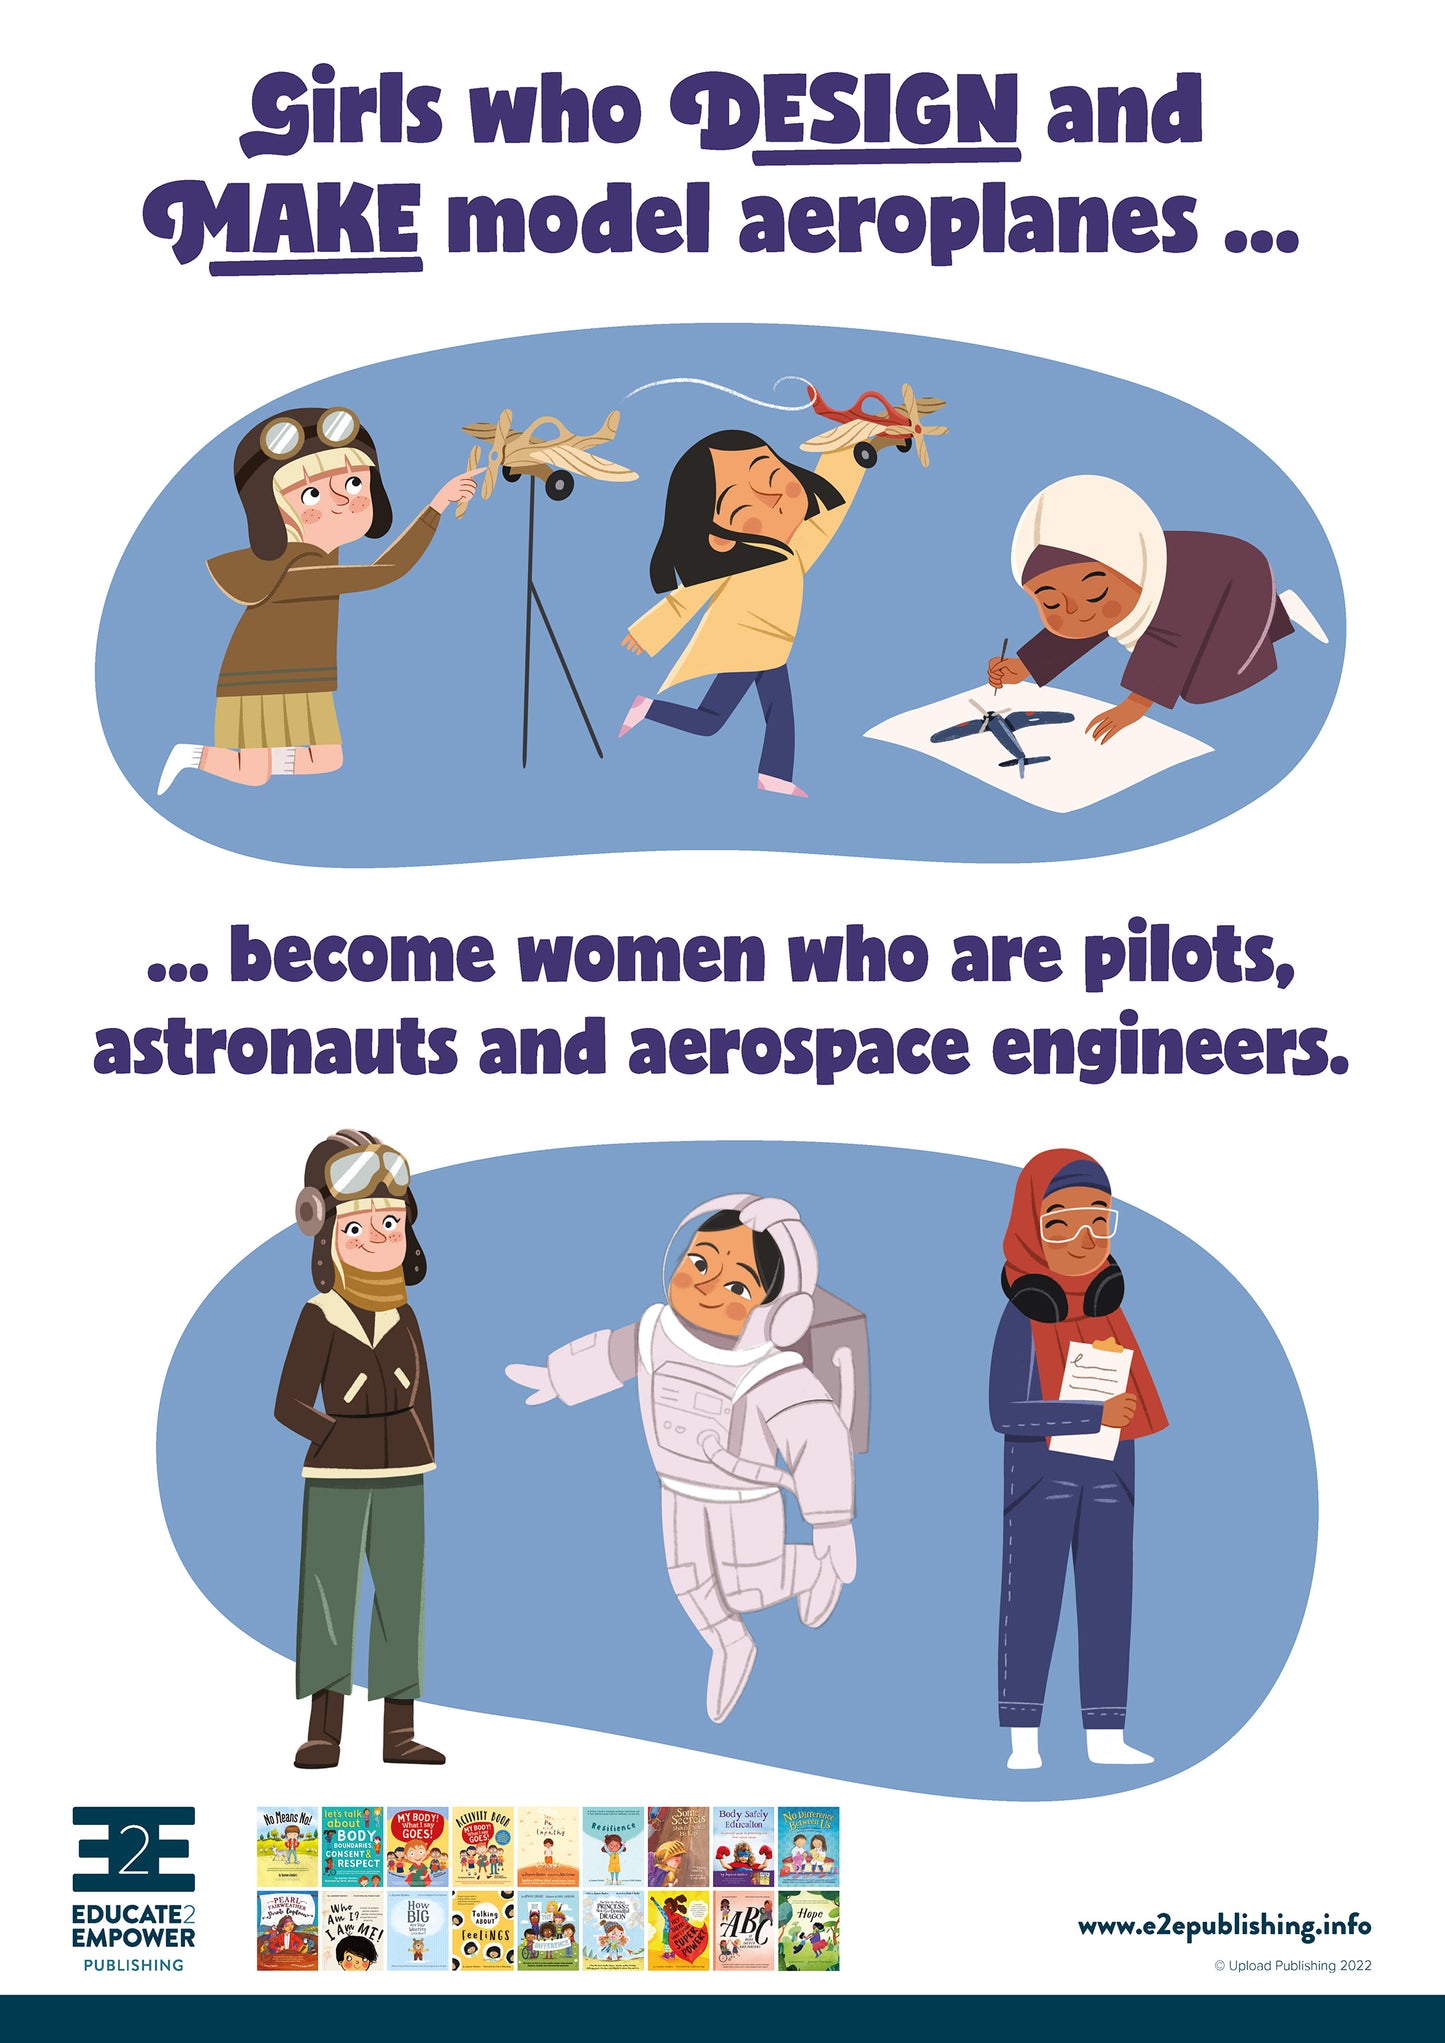 A poster for children titled 'Girls who design and make model aeroplanes... become women who are pilots, astronauts and aerospace engineers. This is accompanied by a cartoon image of three young girls drawing, making a playing with model aeroplanes and below this the same girls as adults working in aeronautical occupations.